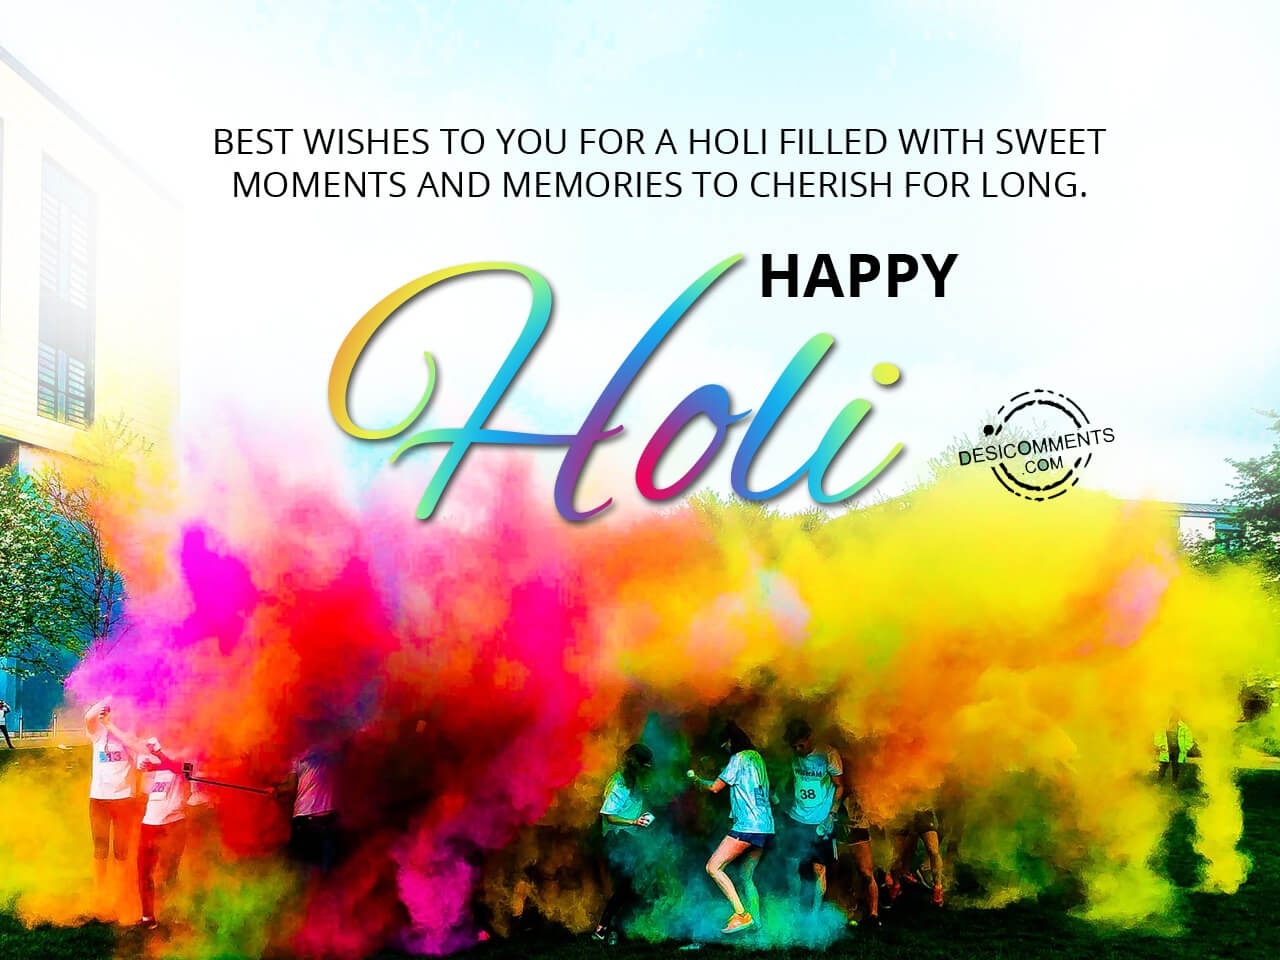 Best wishes to you, Happy Holi - DesiComments.com